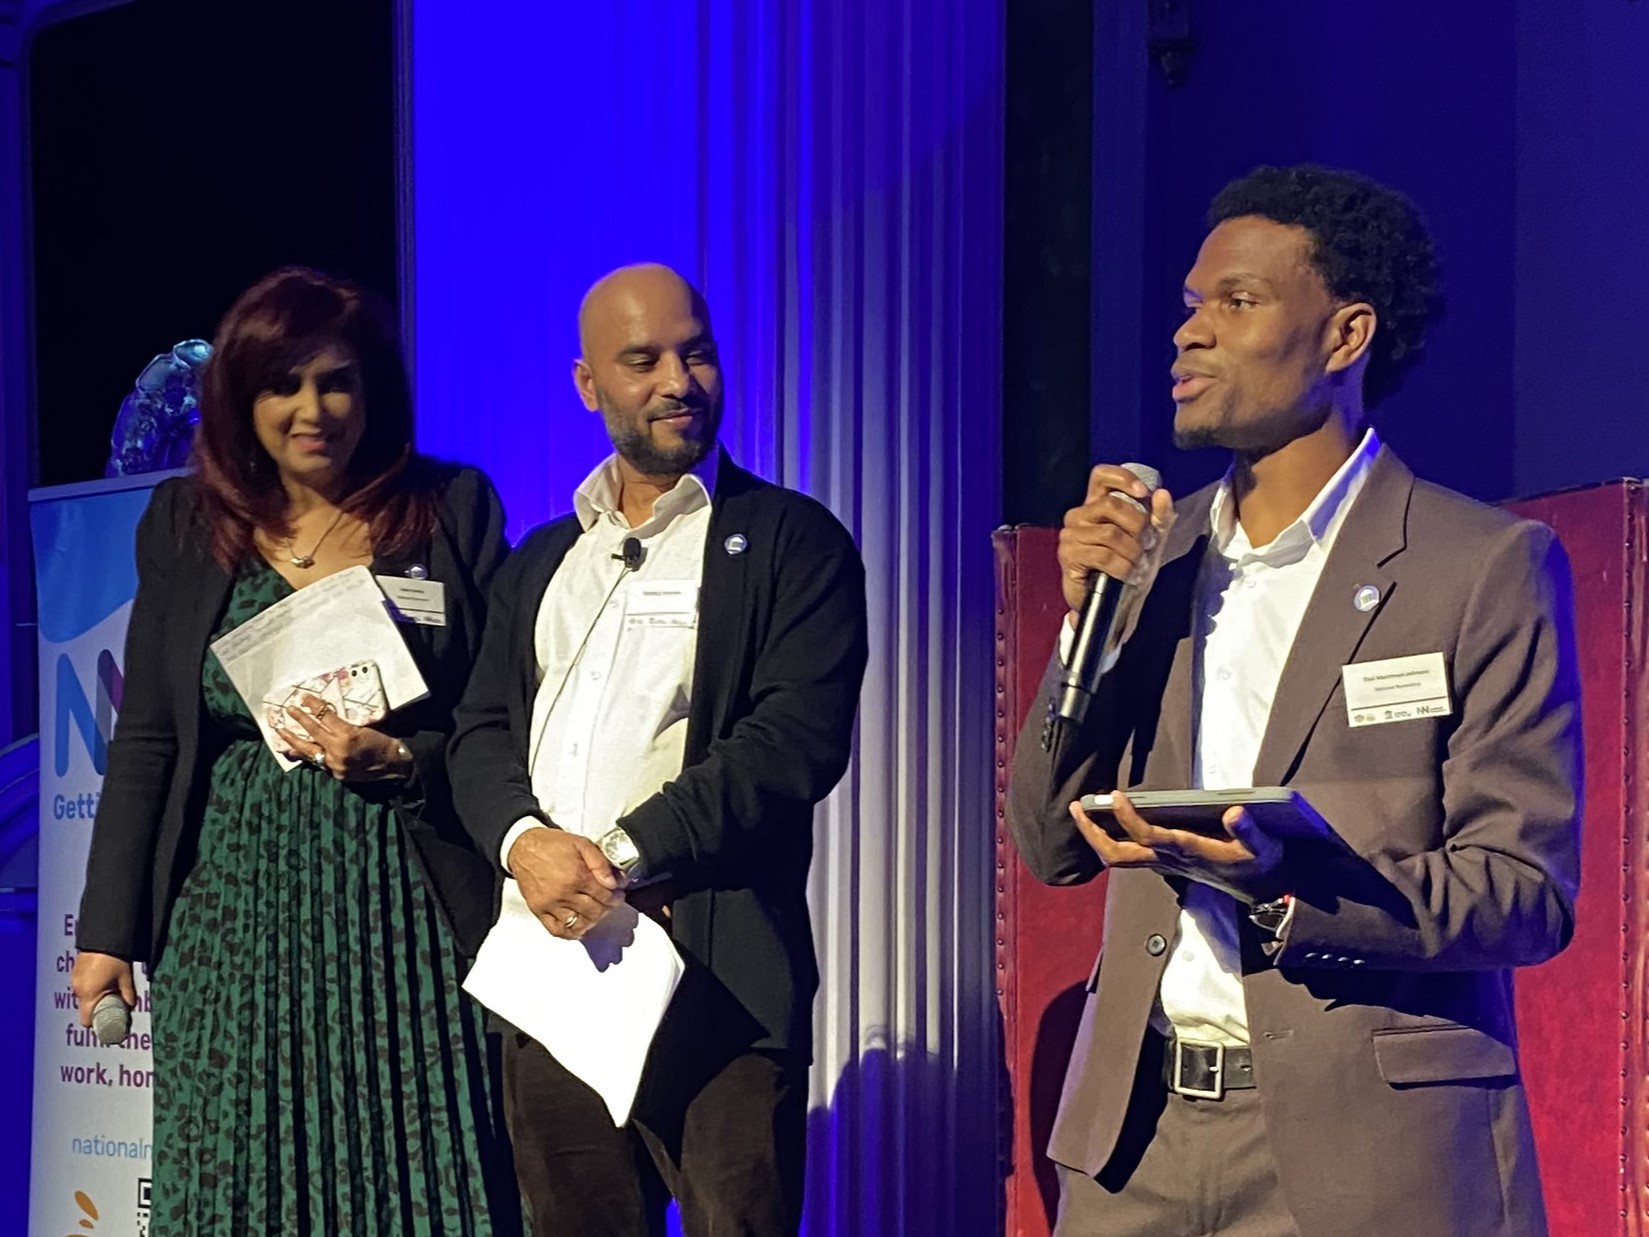 Nikki Chatha, Mokbul Hussain and Timi Merriman-Johnson on stage at the Impact Reception